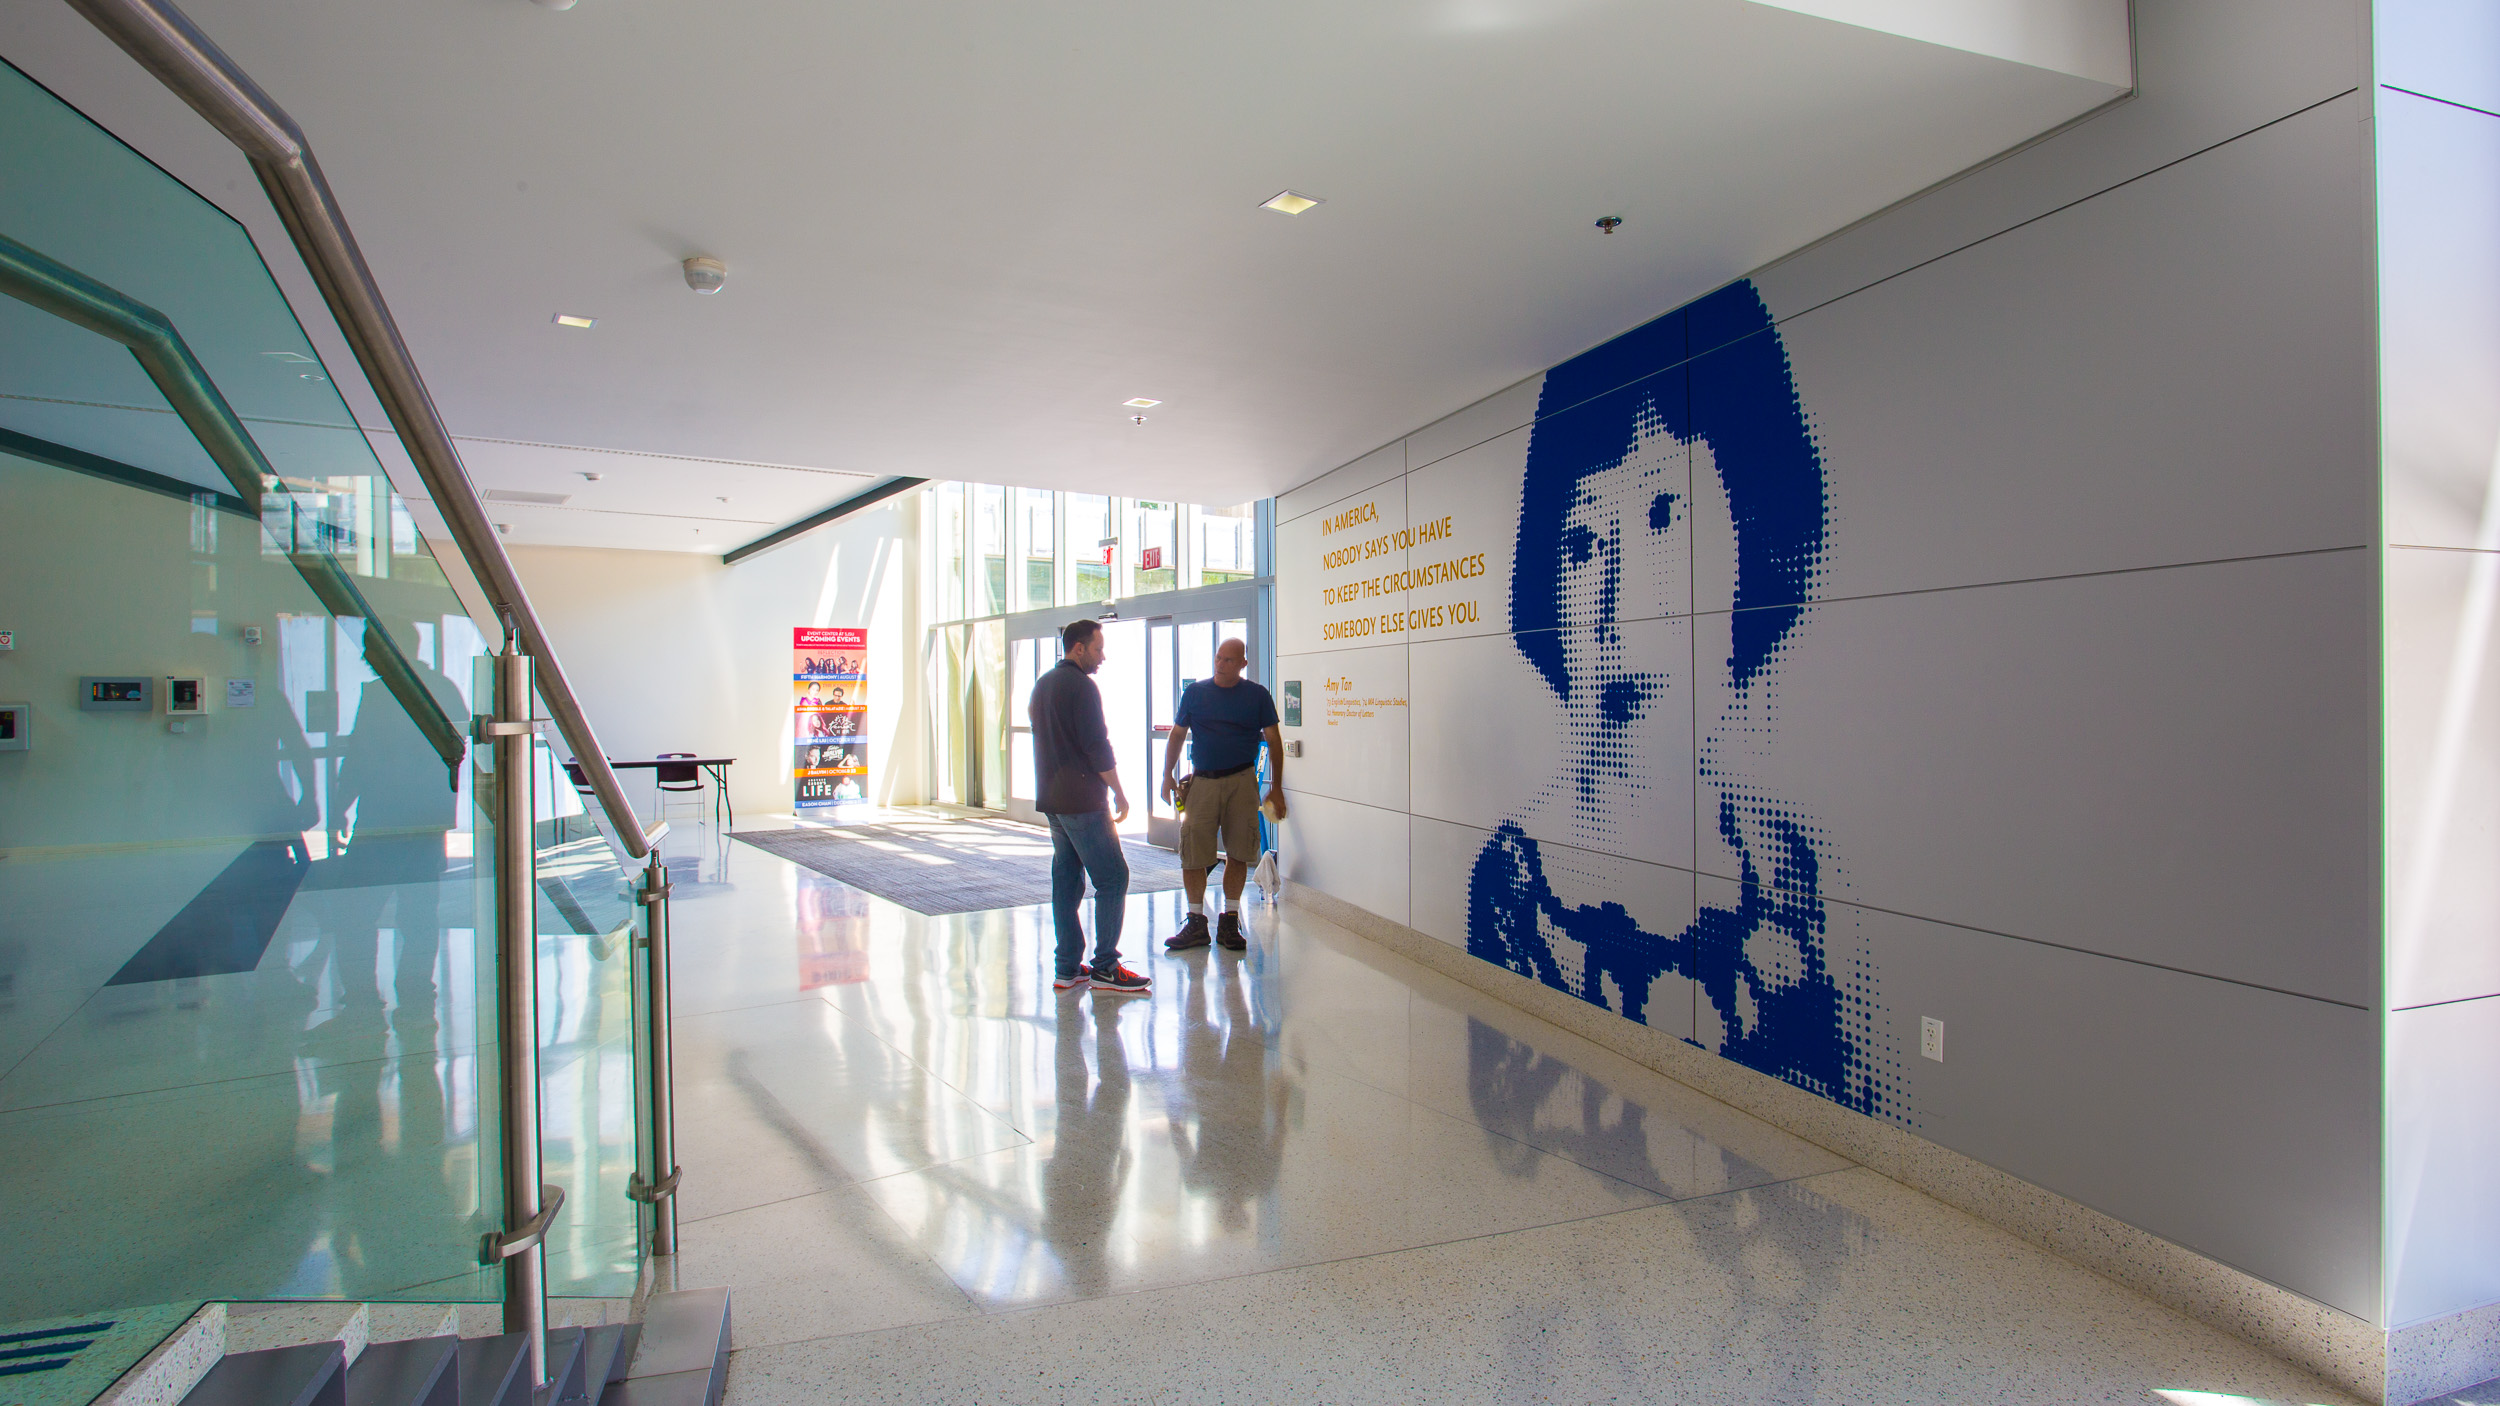 San Jose University Student Union Feature Face Quote Wall